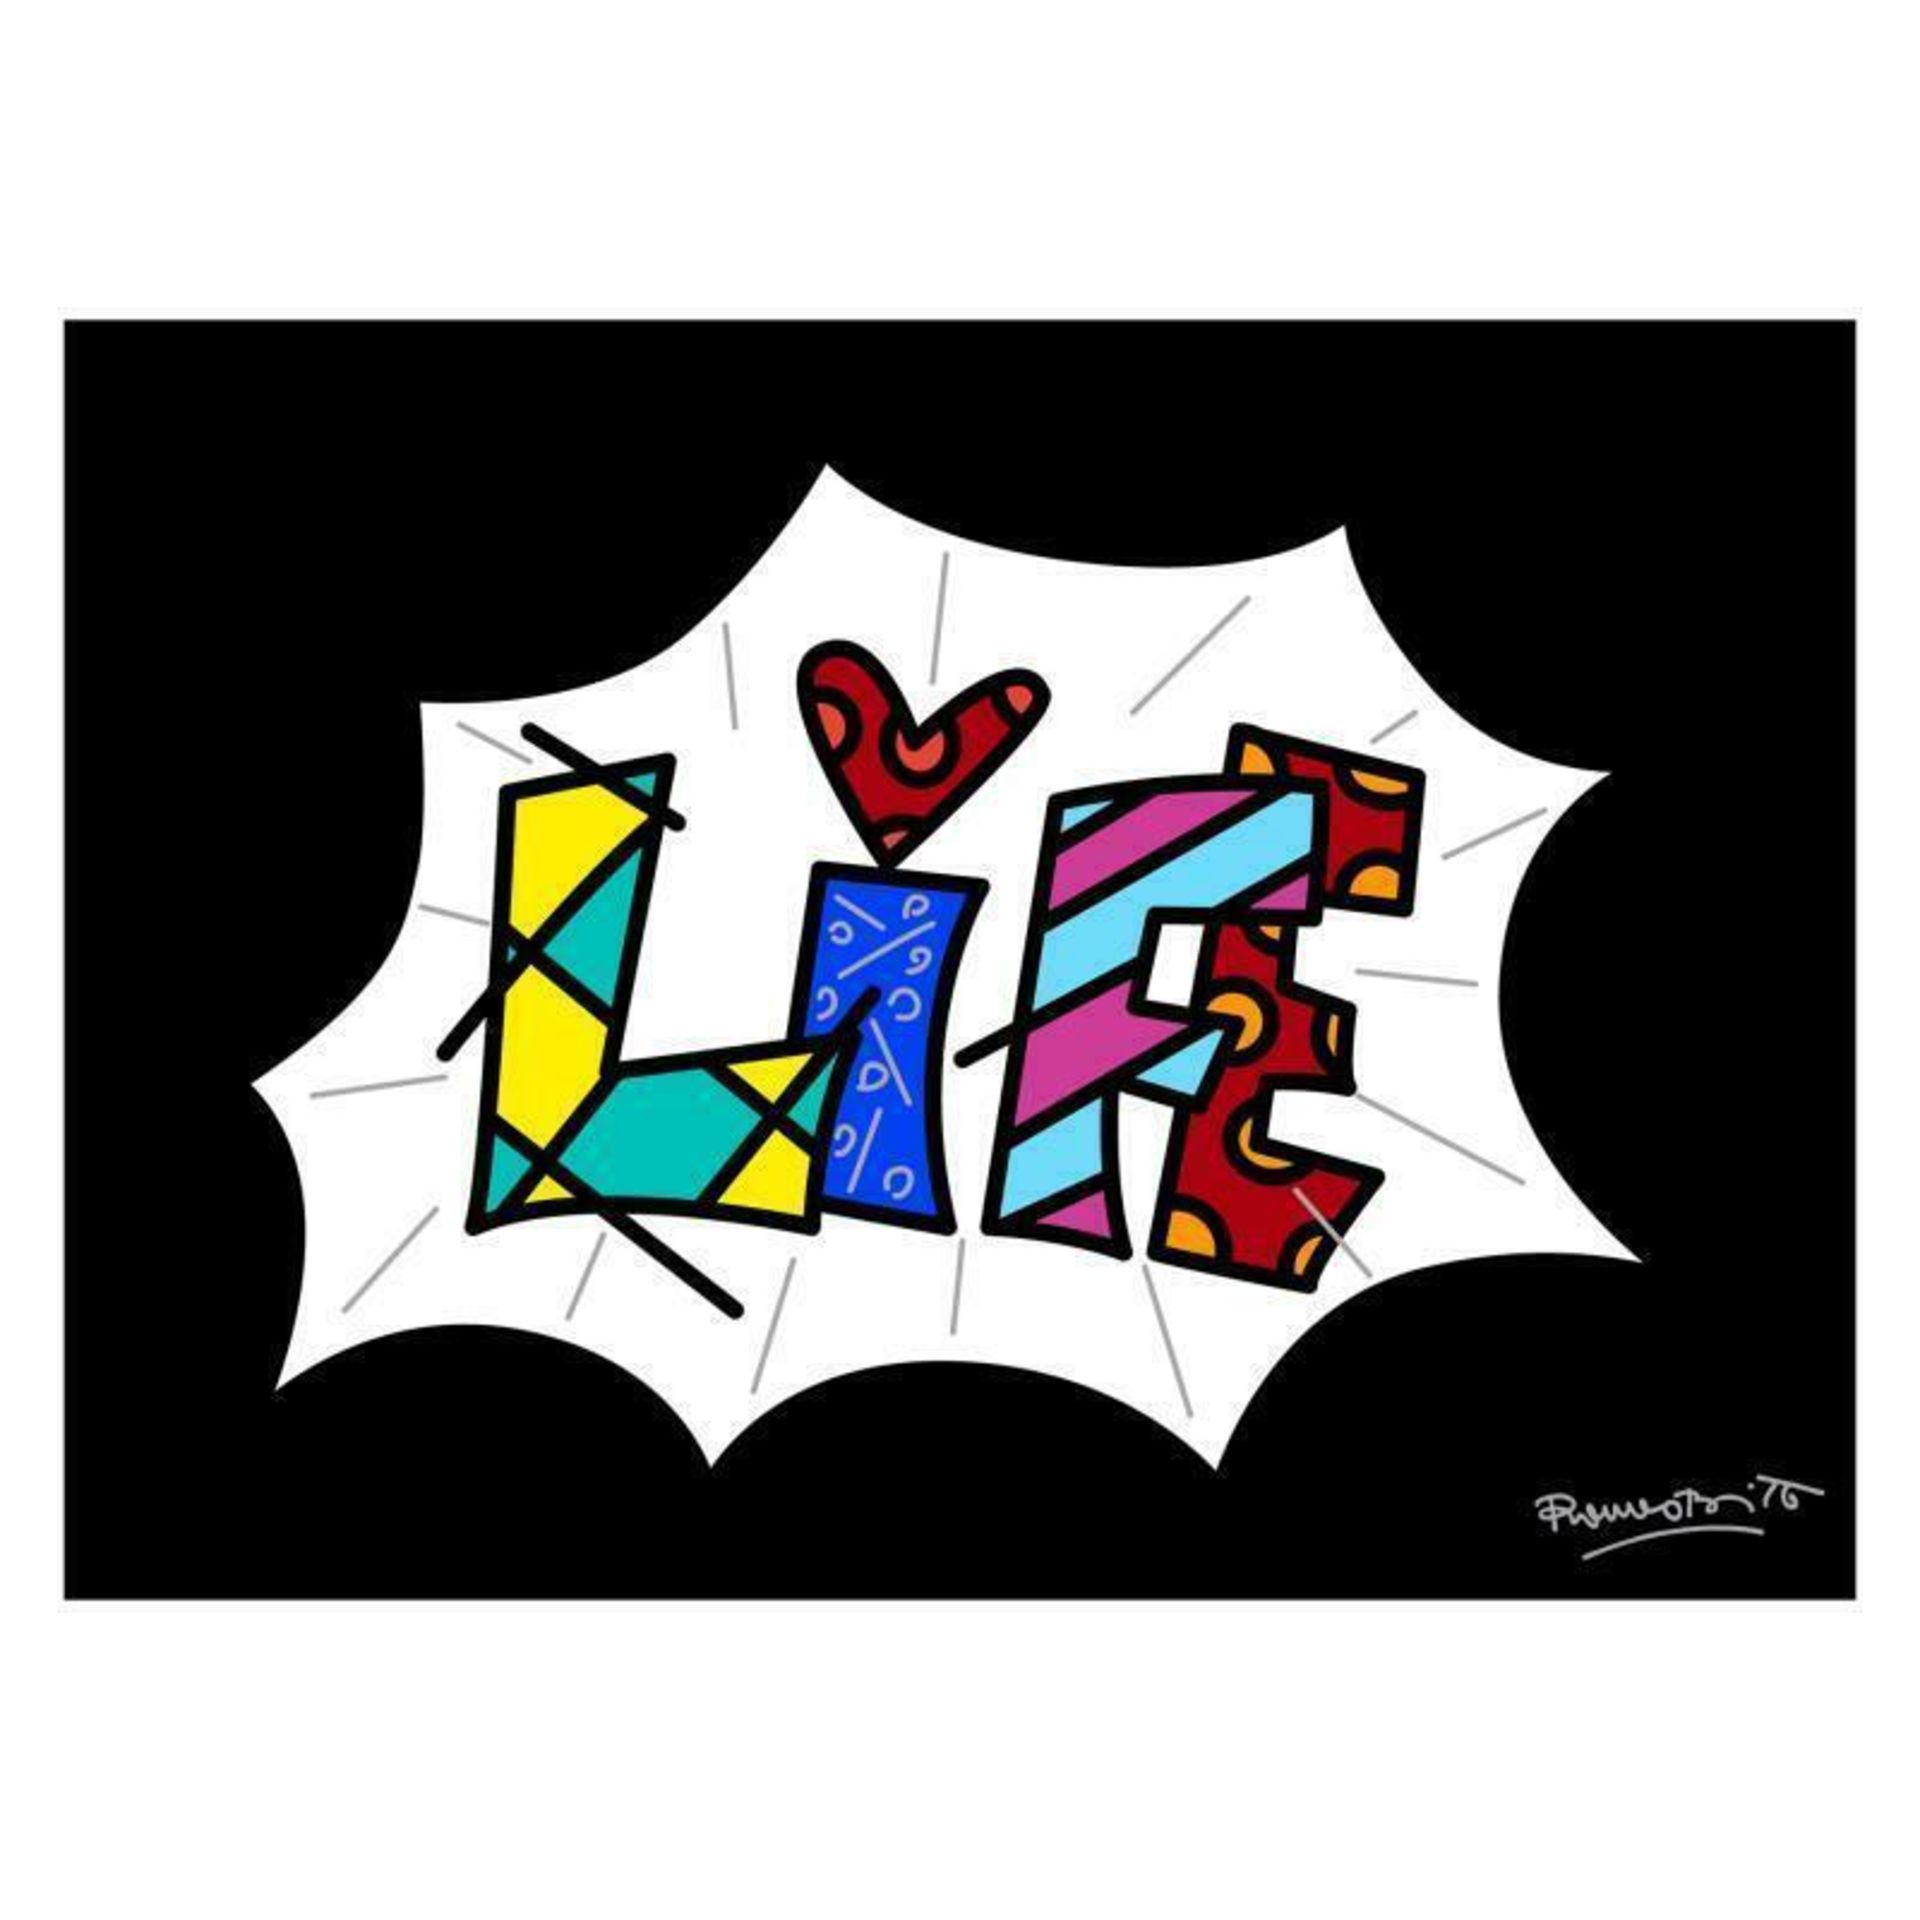 Romero Britto "Life Black Mini Word" Hand Signed Giclee on Canvas; Authenticated